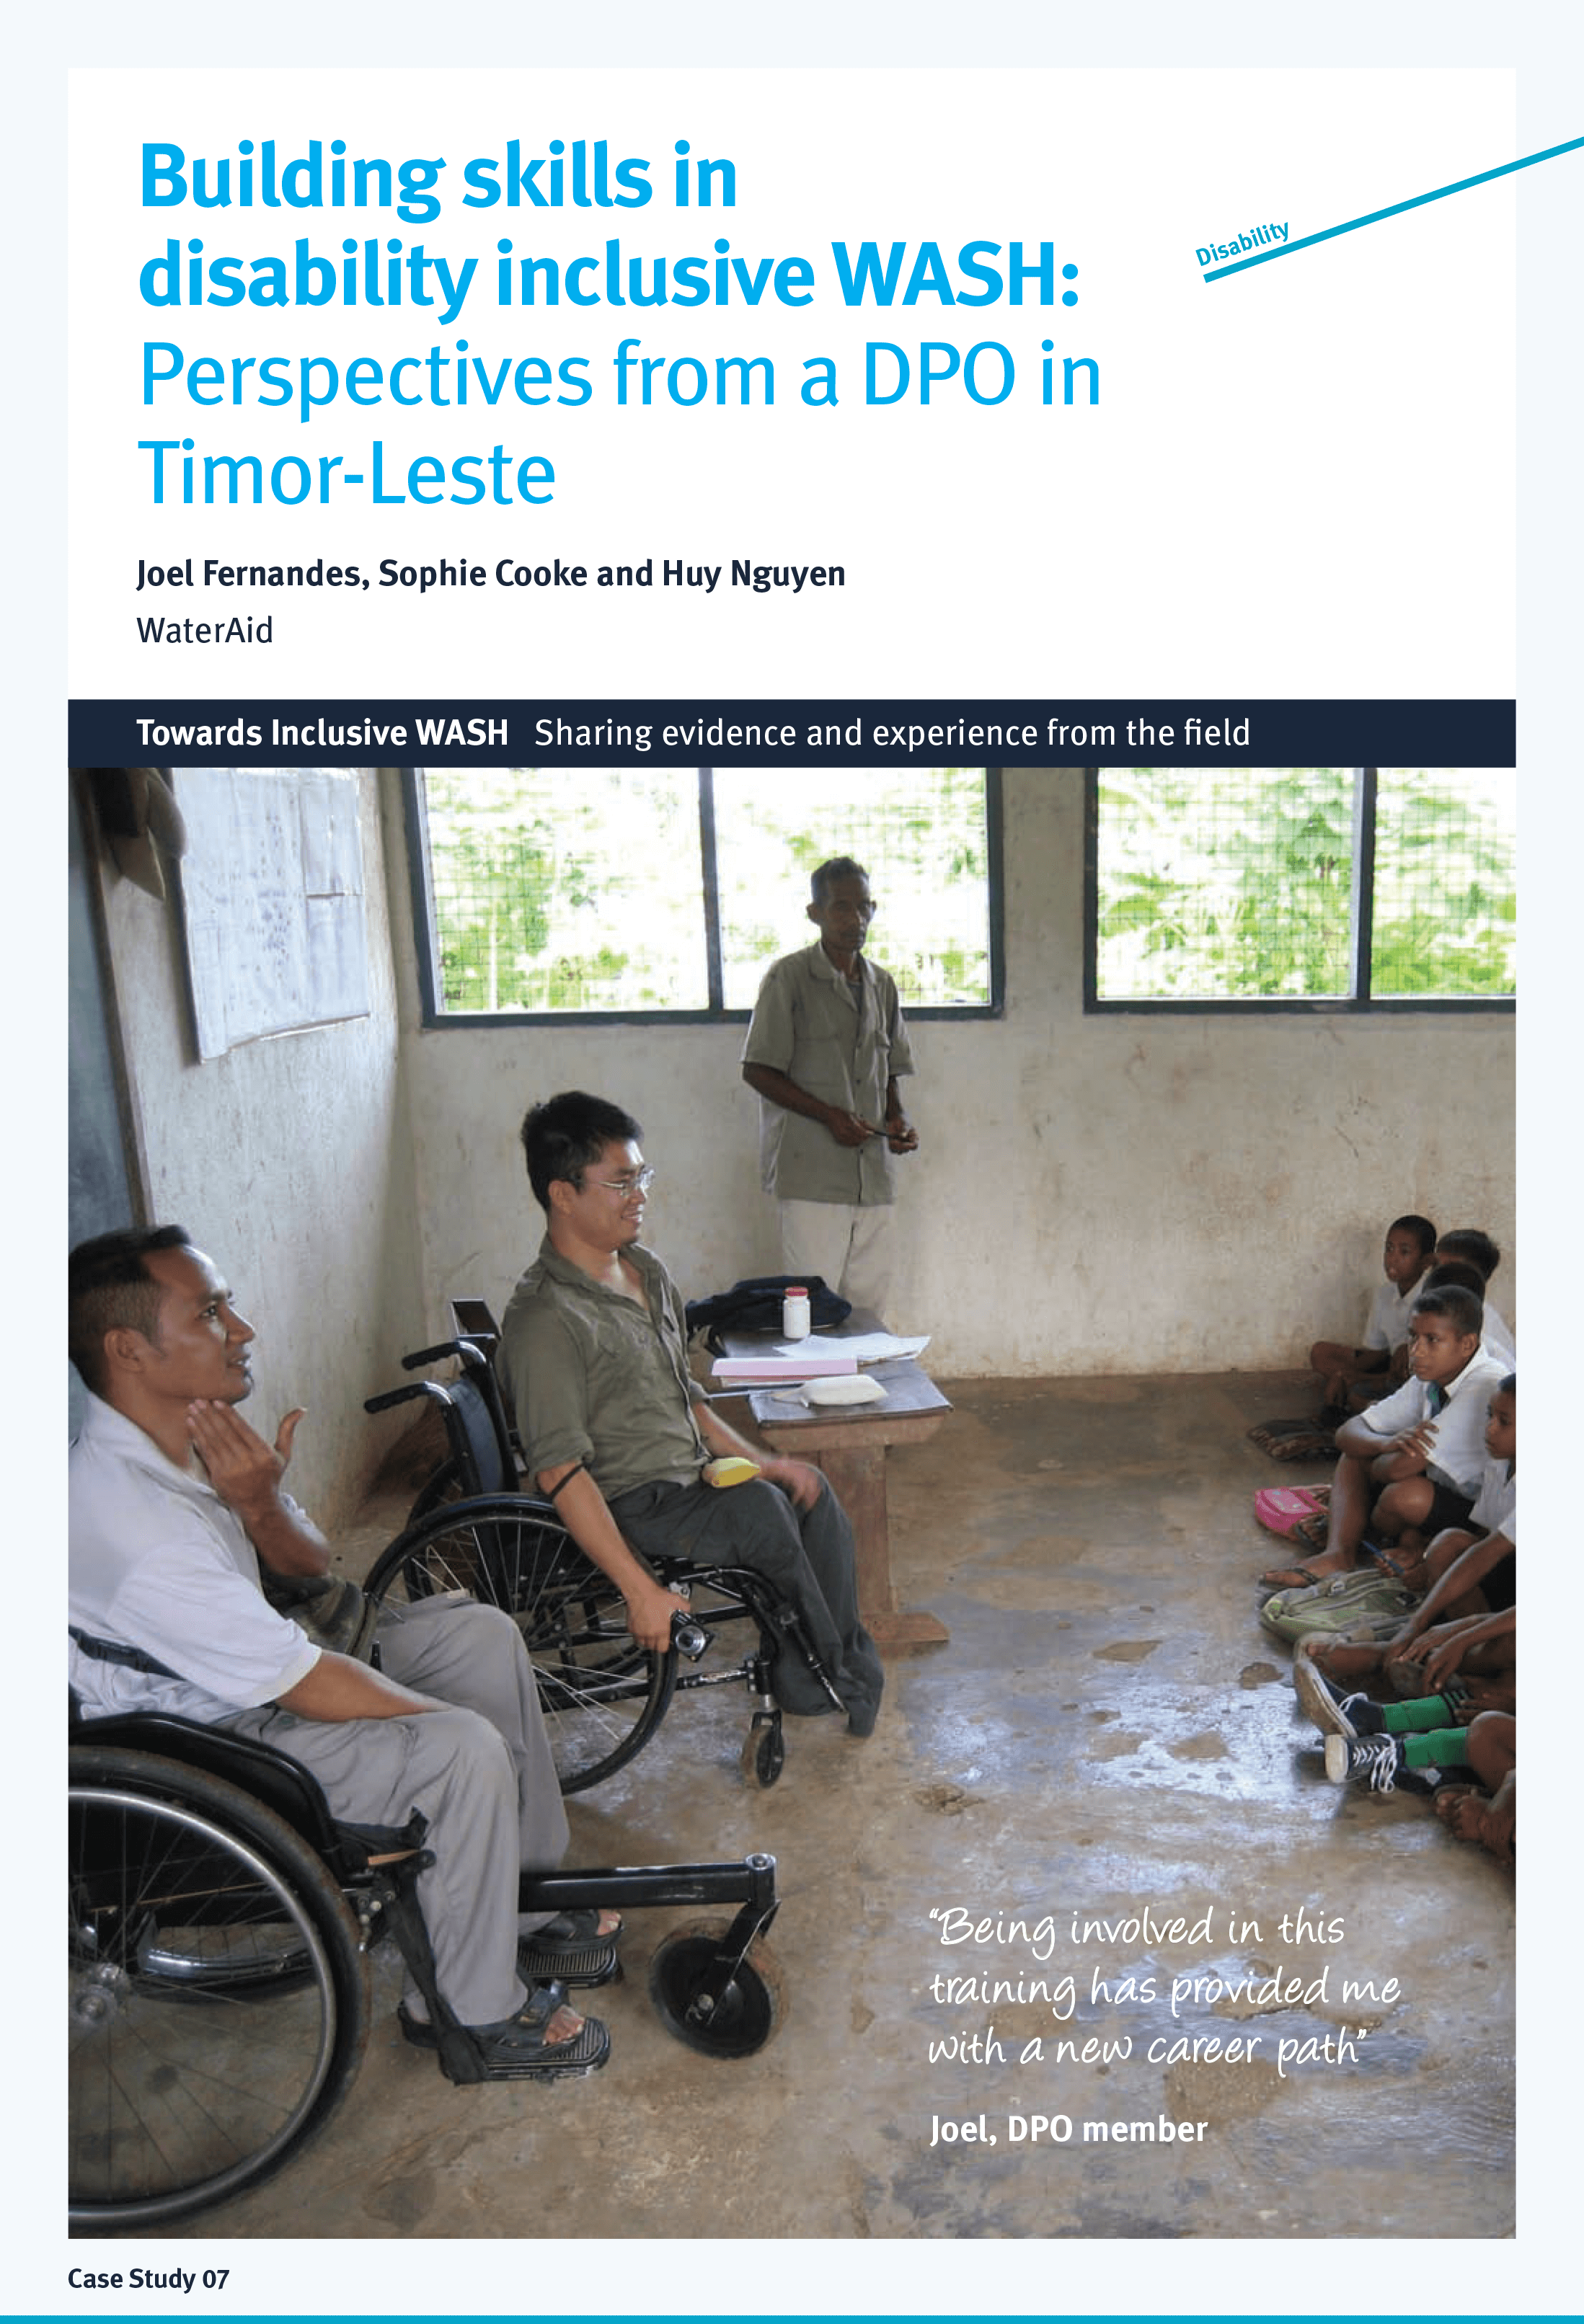 Building skills in disability inclusive WASH